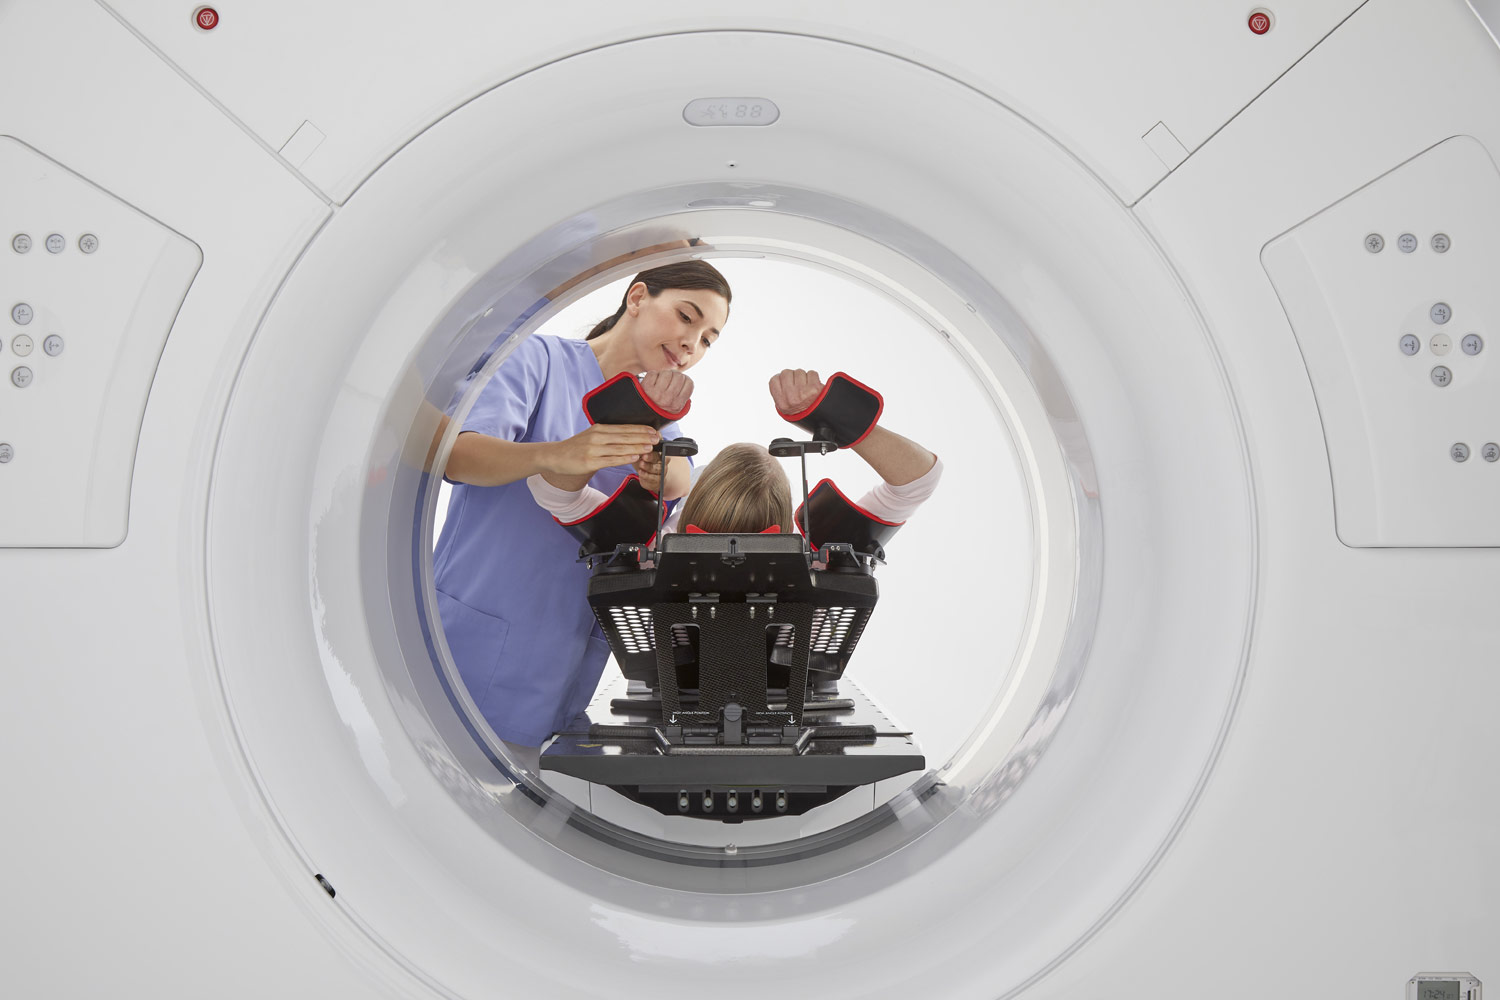 Aquilion Exceed LB wide bore CT scanner